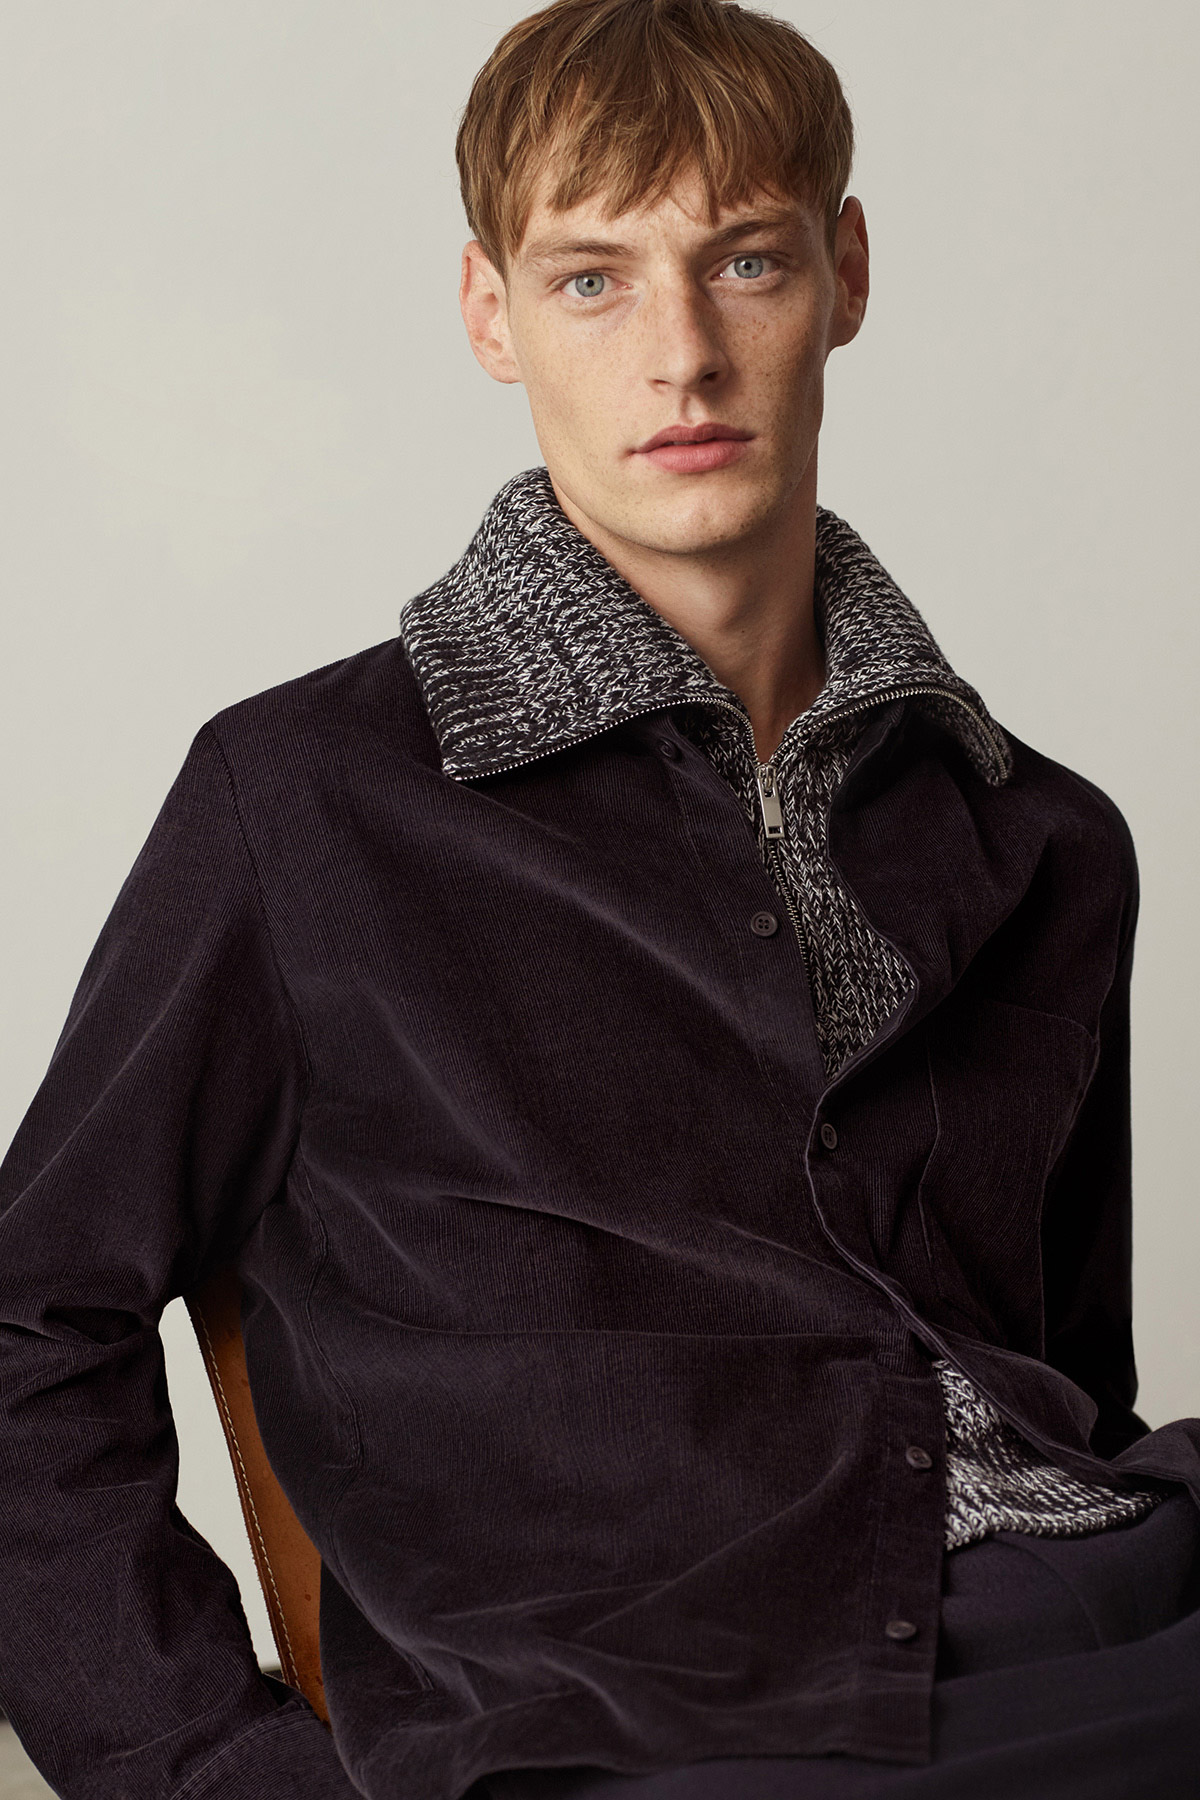 Relaxed layering featuring our corduroy shirt and knitted tabard. Shop the edit: festivalwalk